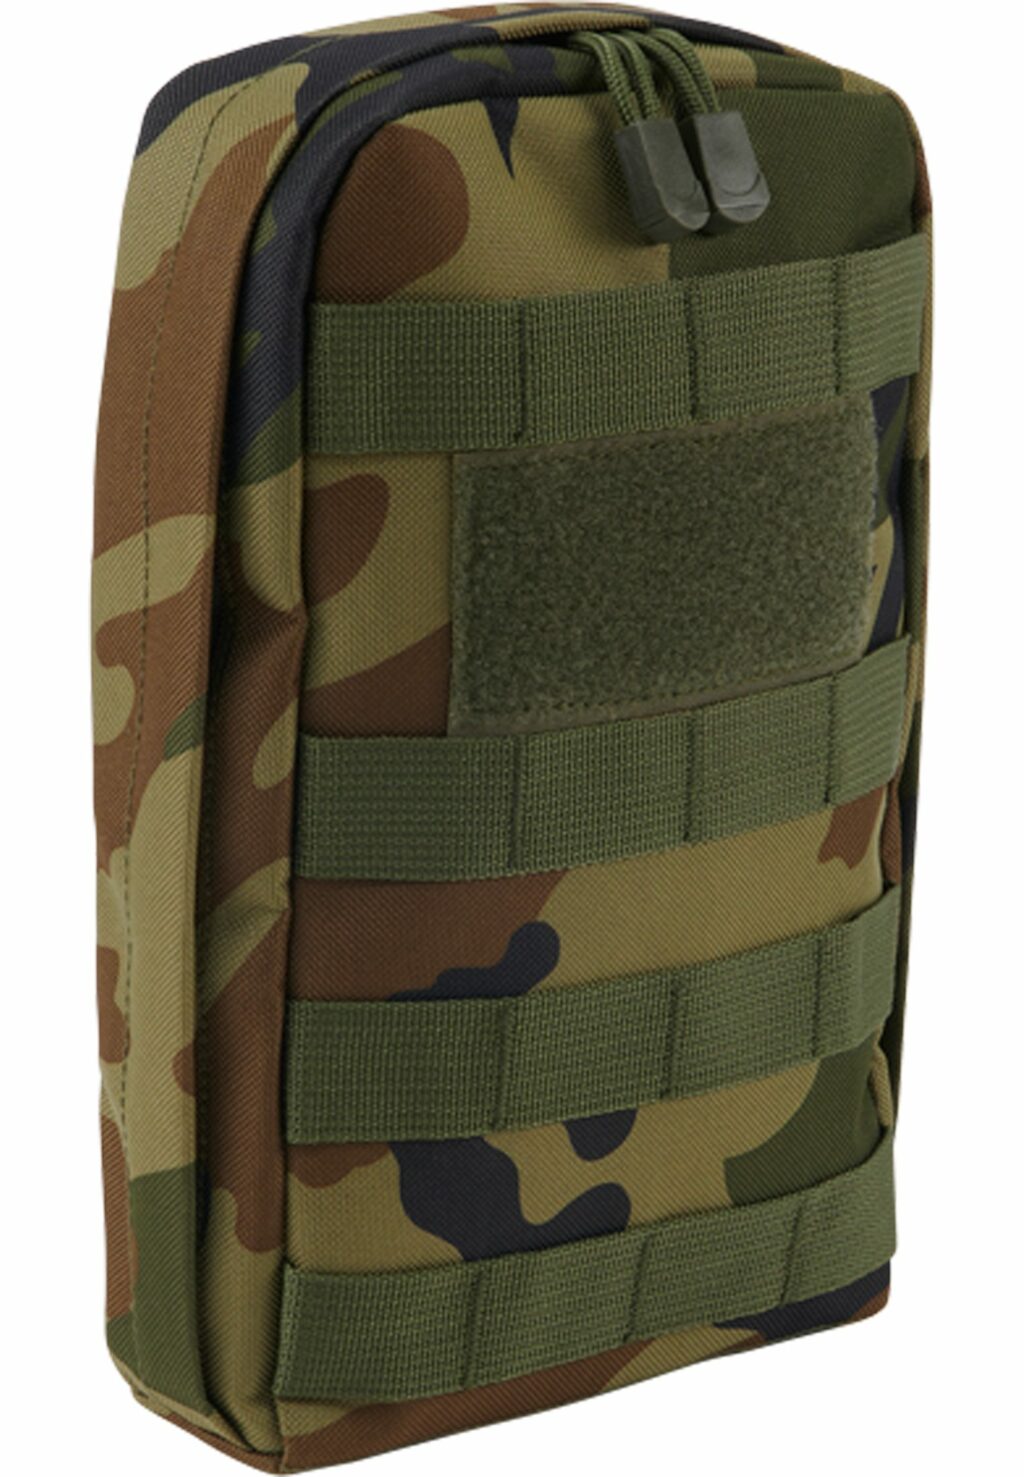 Brandit Snake Molle Pouch olive camo  one BD8044